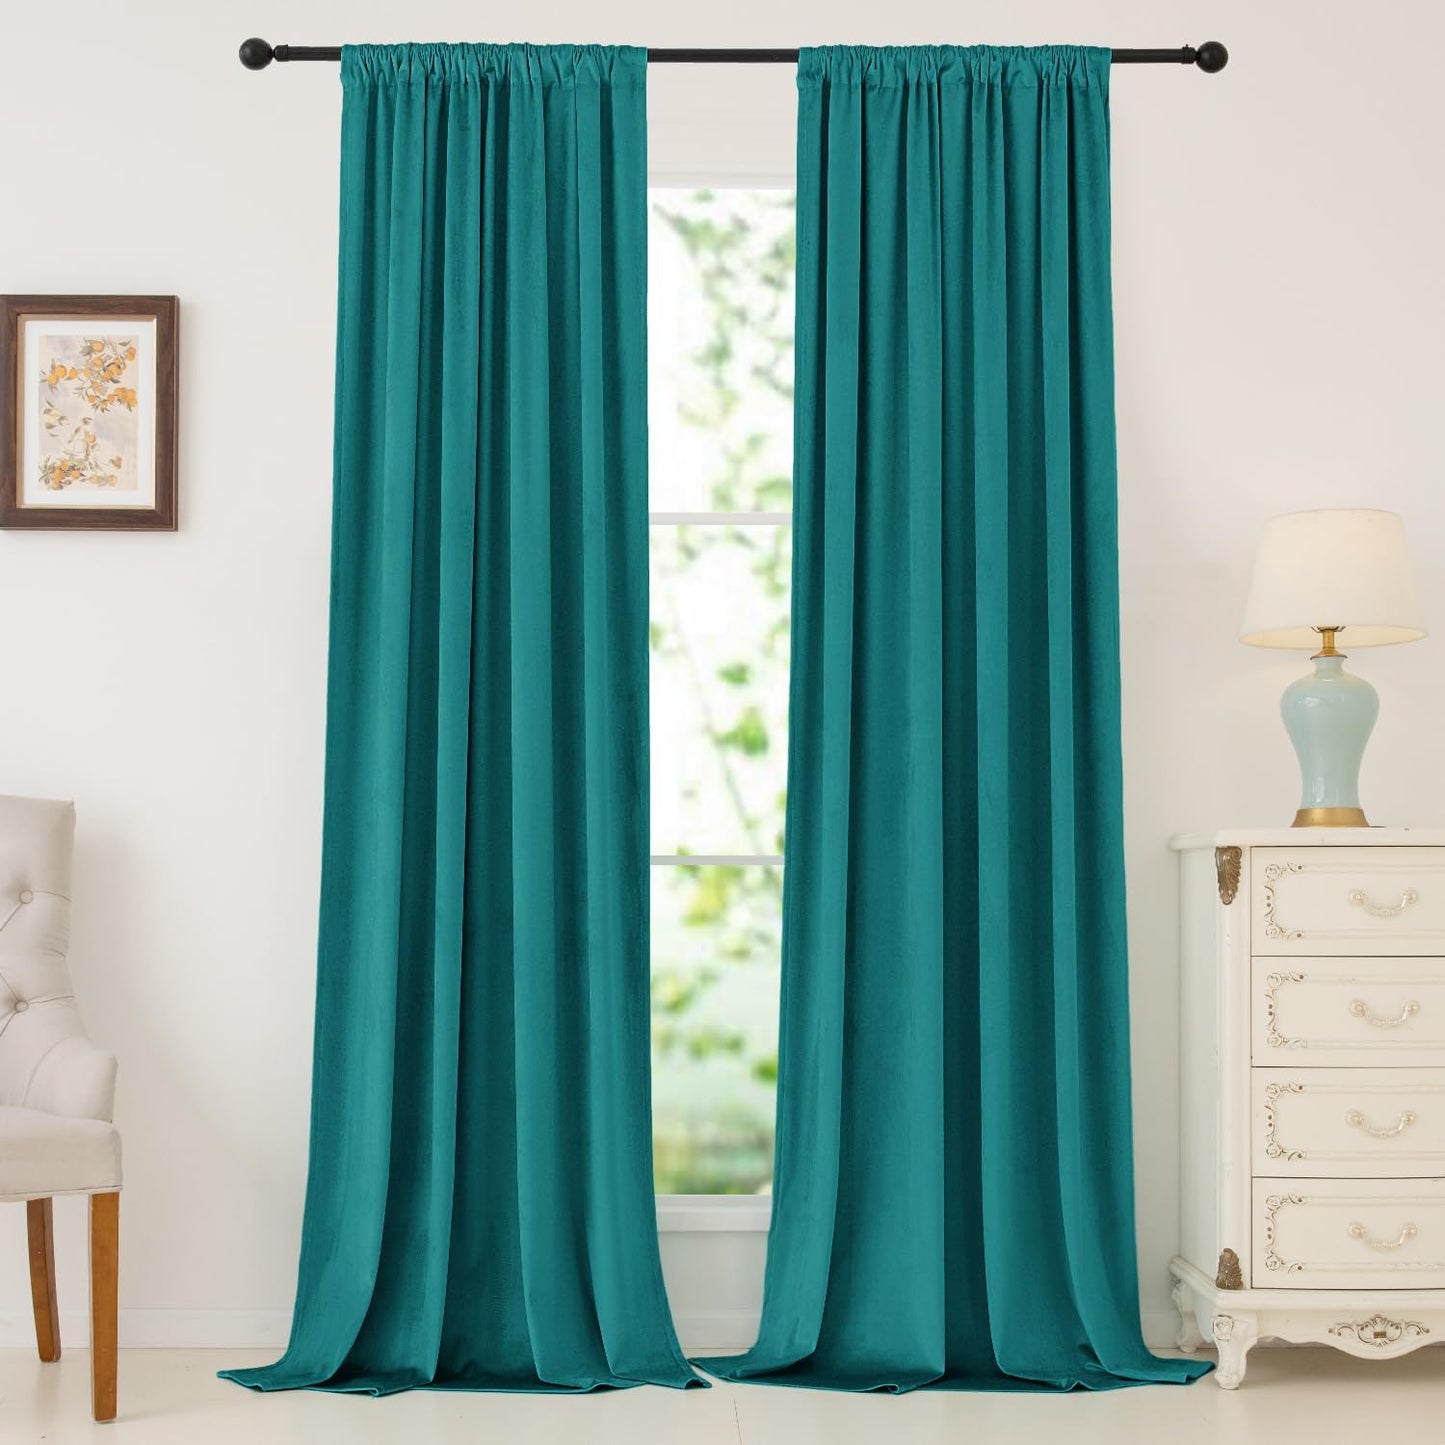 Nanbowang Green Velvet Curtains 63 Inches Long Dark Green Light Blocking Rod Pocket Window Curtain Panels Set of 2 Heat Insulated Curtains Thermal Curtain Panels for Bedroom  nanbowang Turquoise 52"X120" 